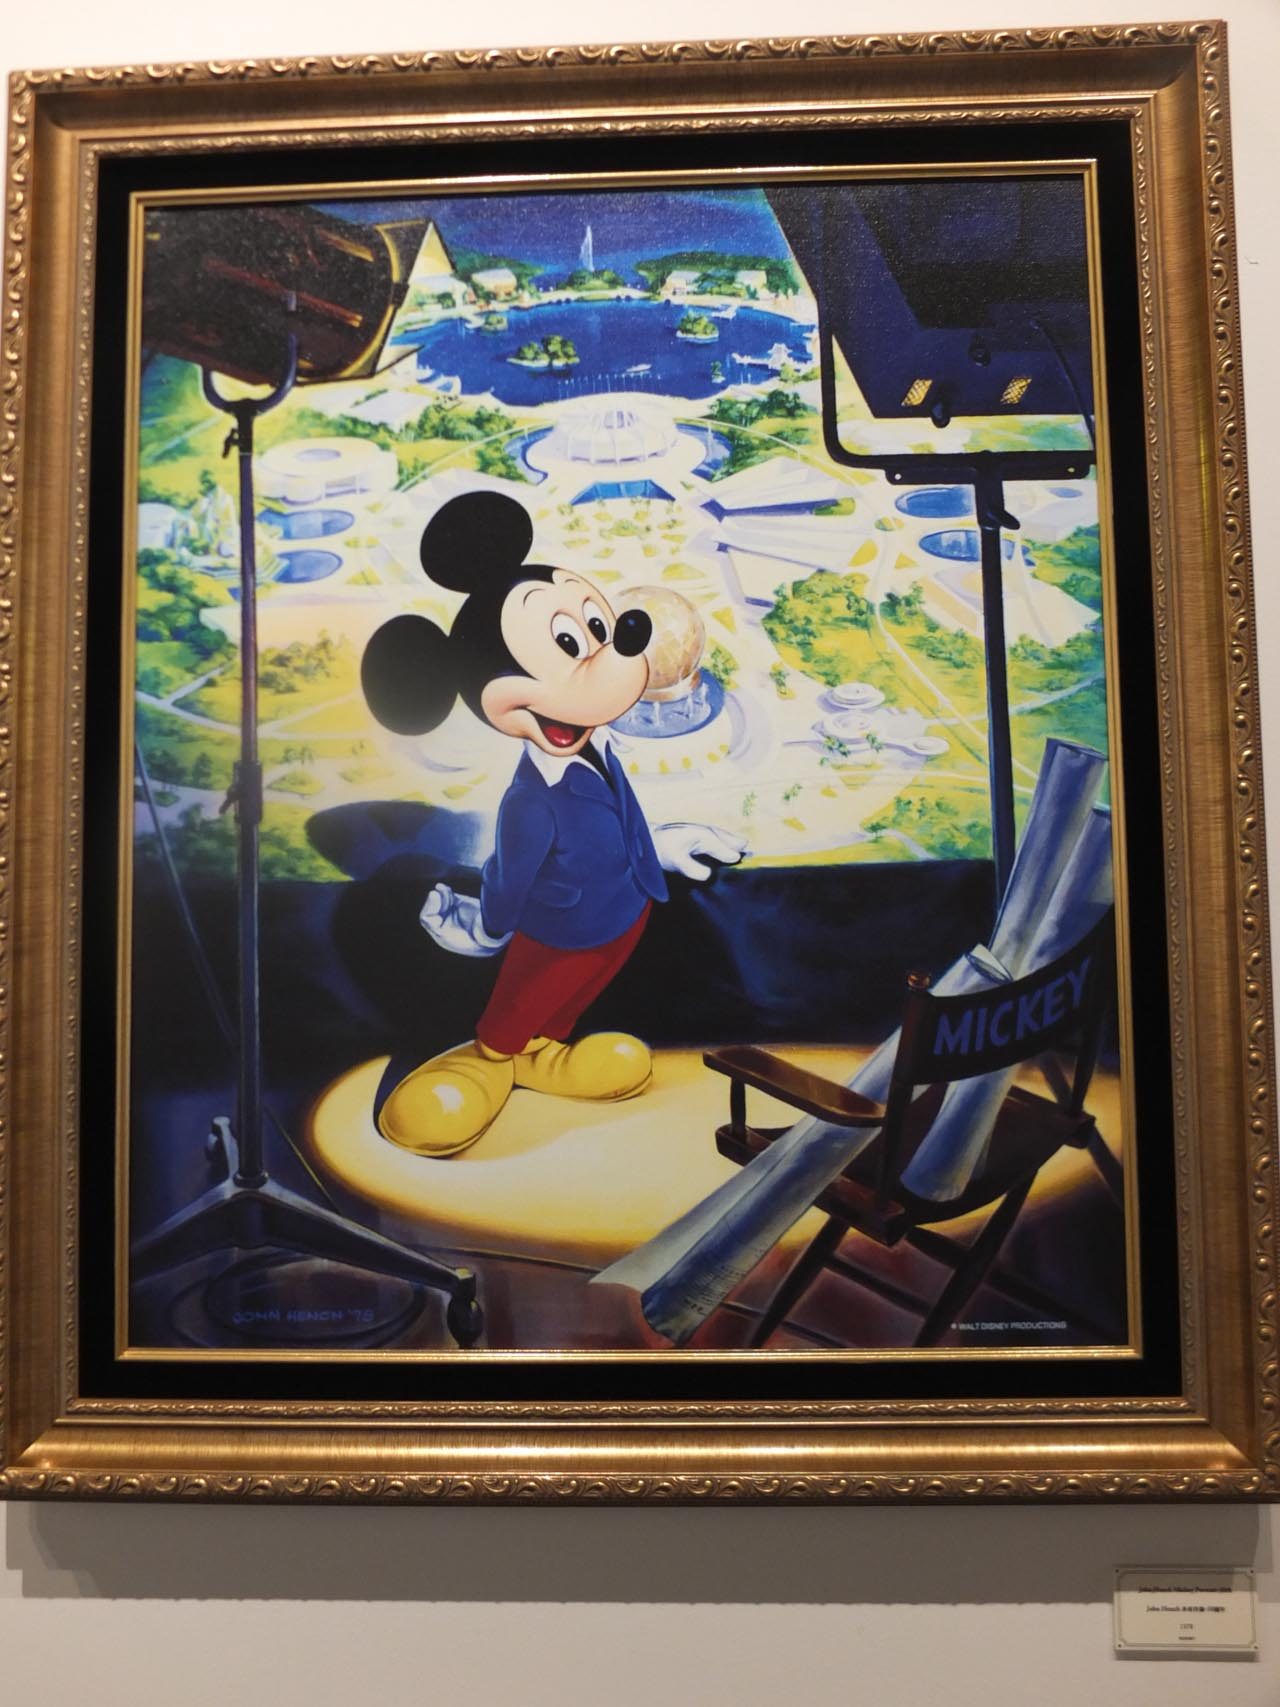 TIMELESS. A portrait of Mickey Mouse by  John Hench. 